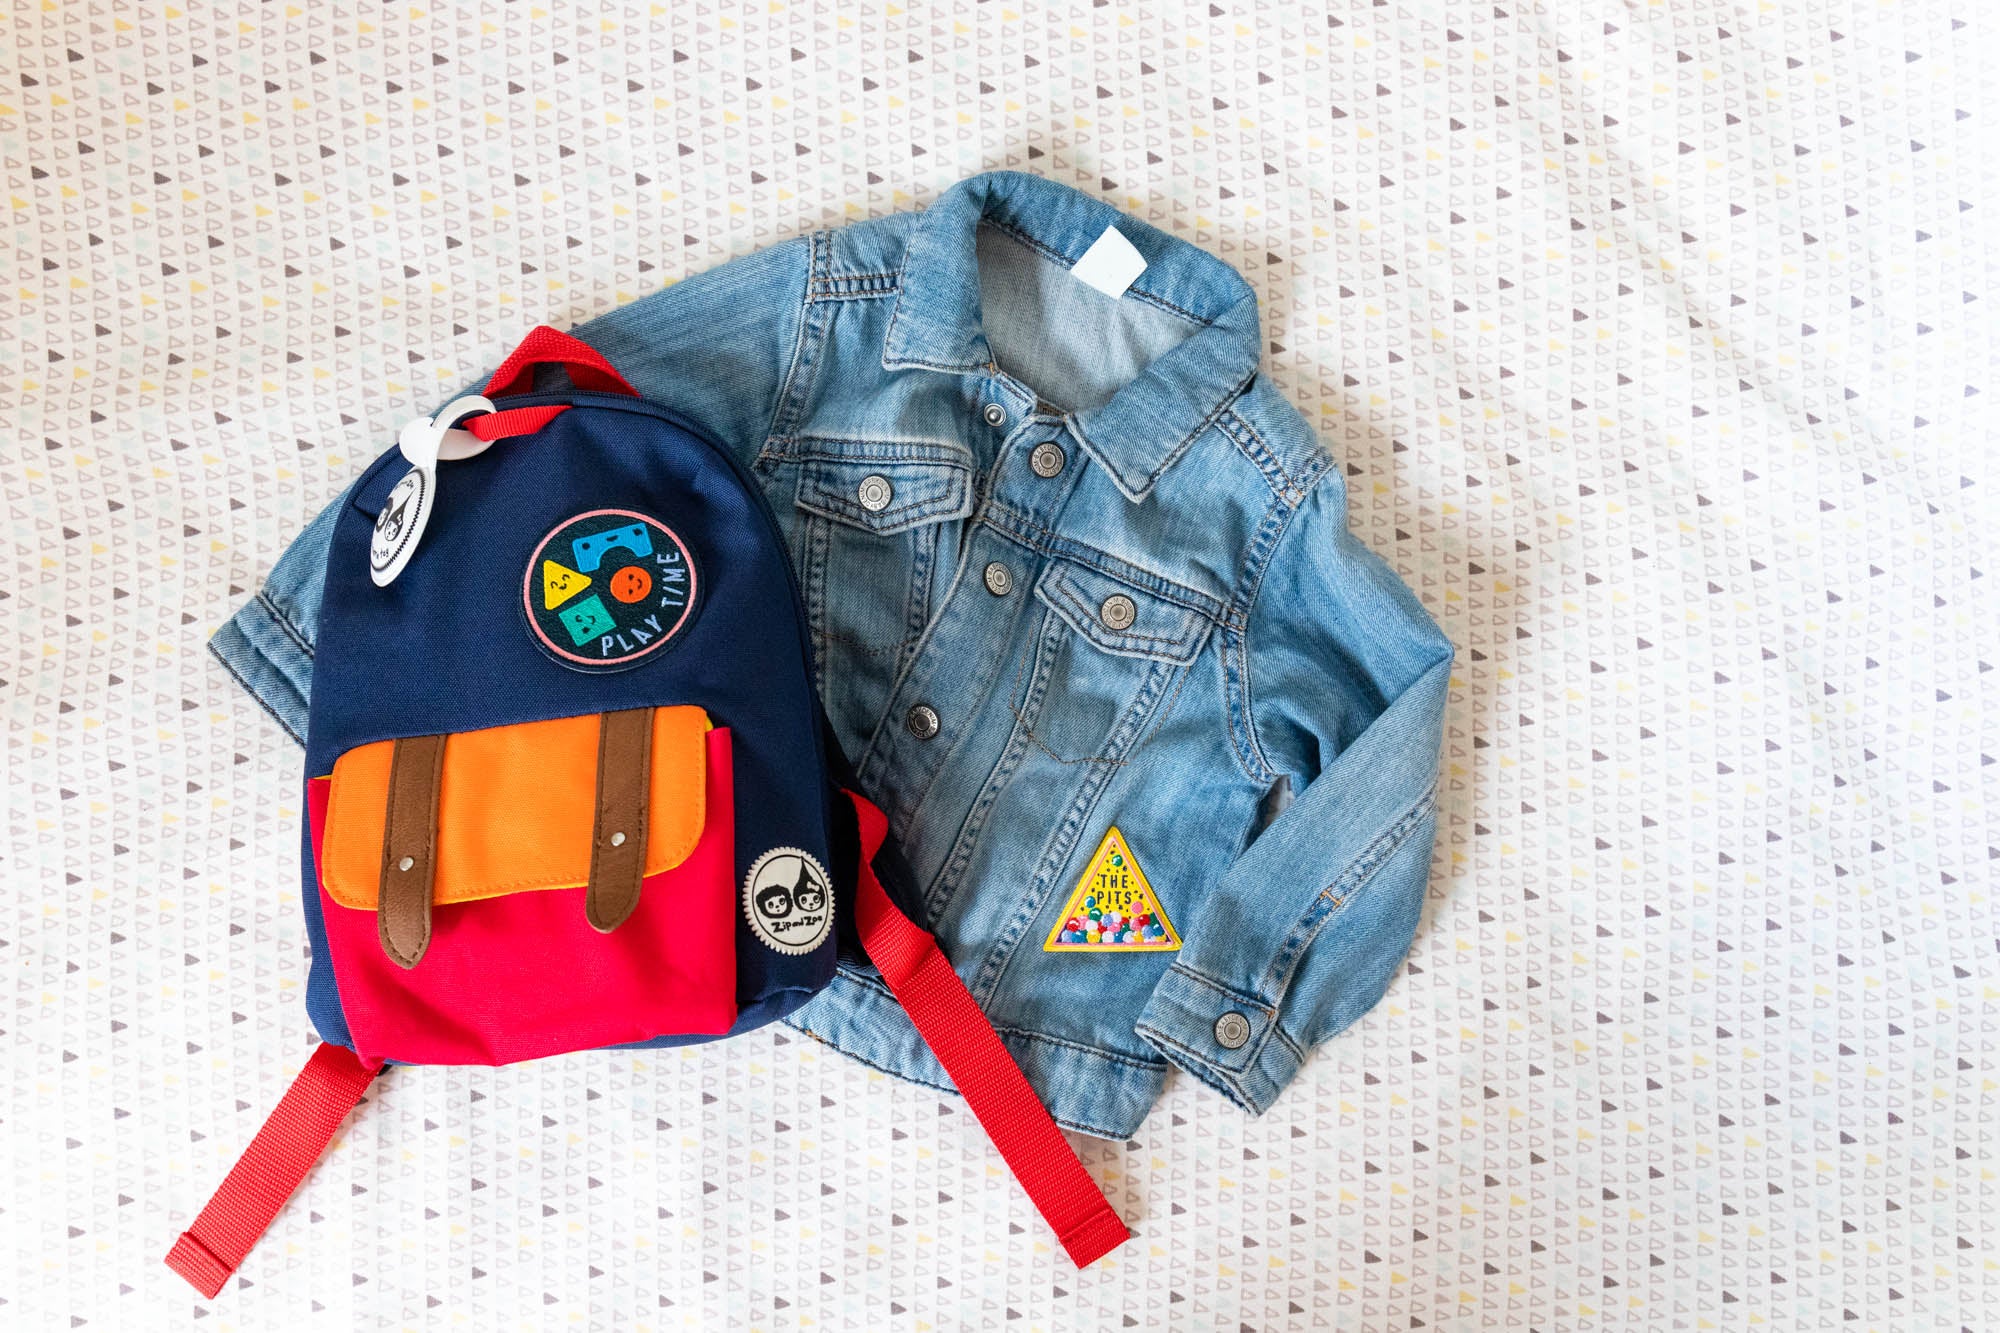 Back to school sustainably – customise with your kiddos